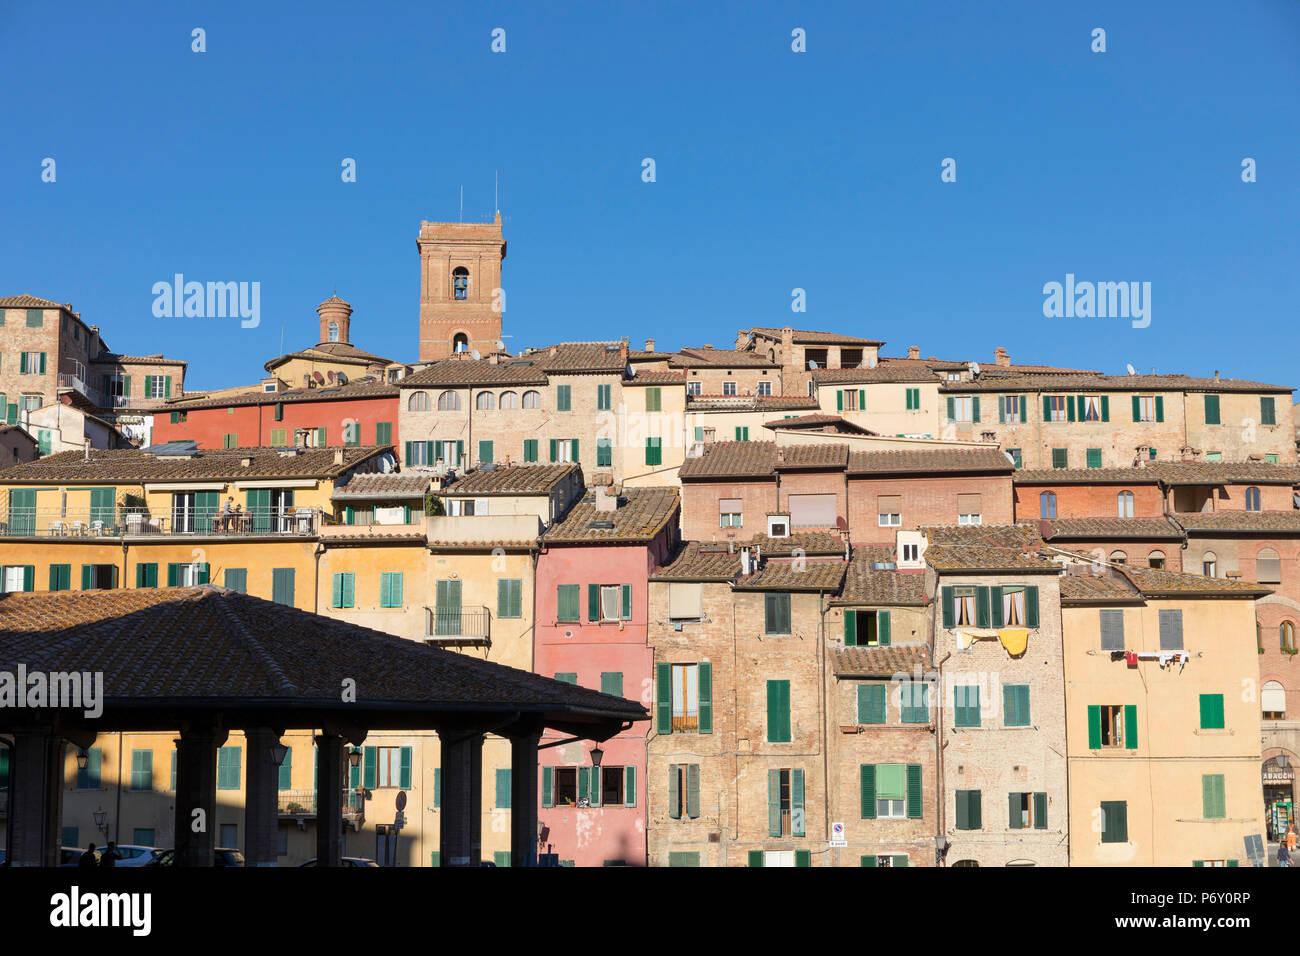 Colourful buildings and covered market in Siena, Tuscany, Italy Stock Photo